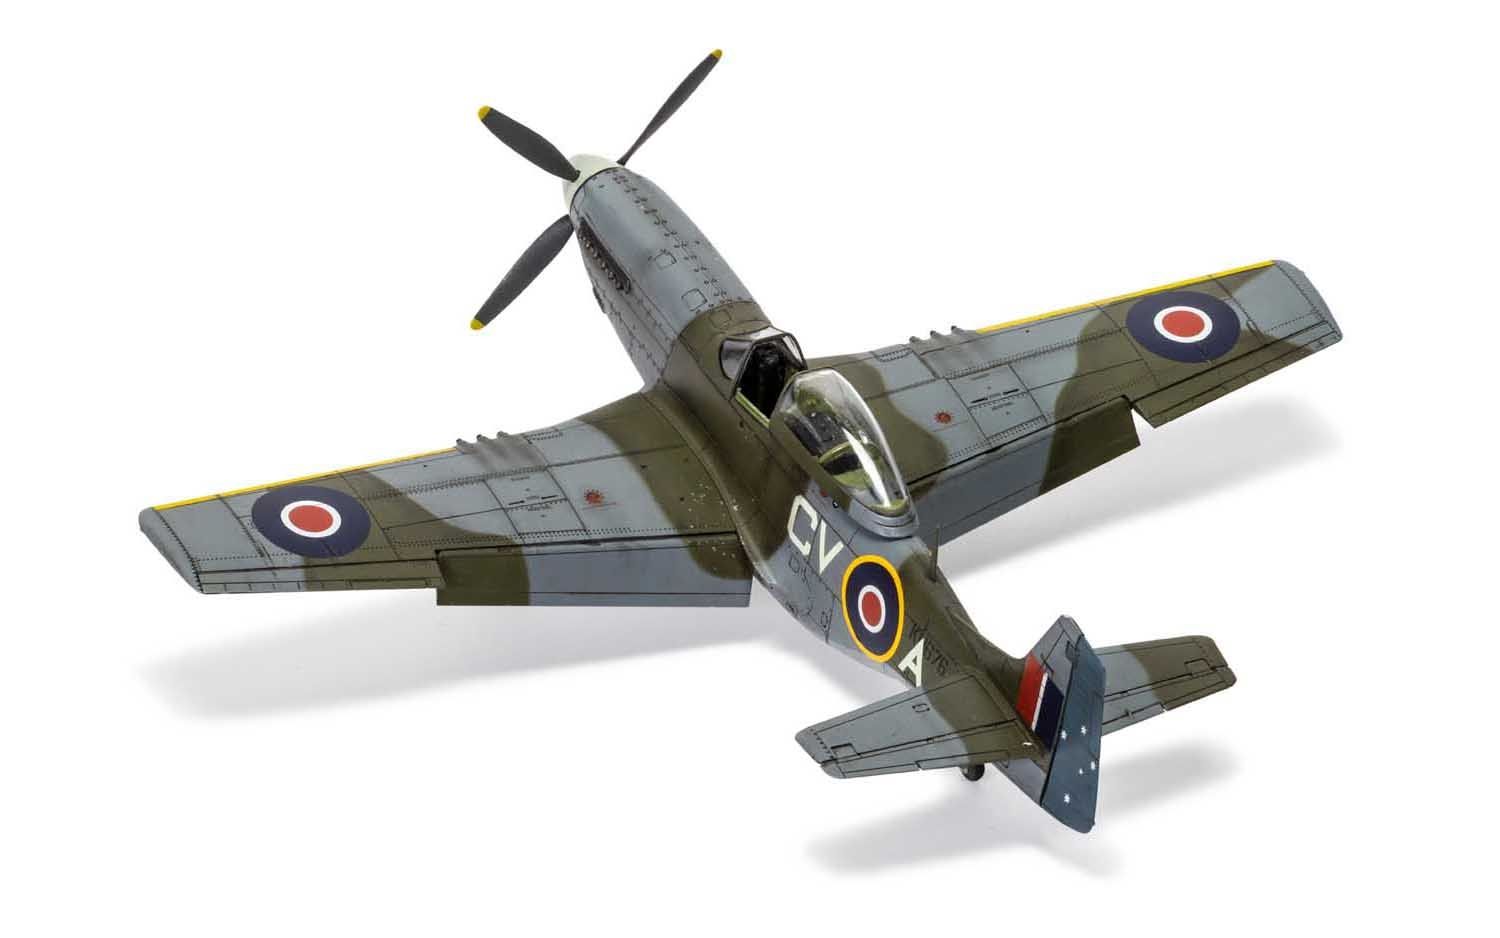 Airfix Models A02047, North American F510 MUSTANG Plane Kit